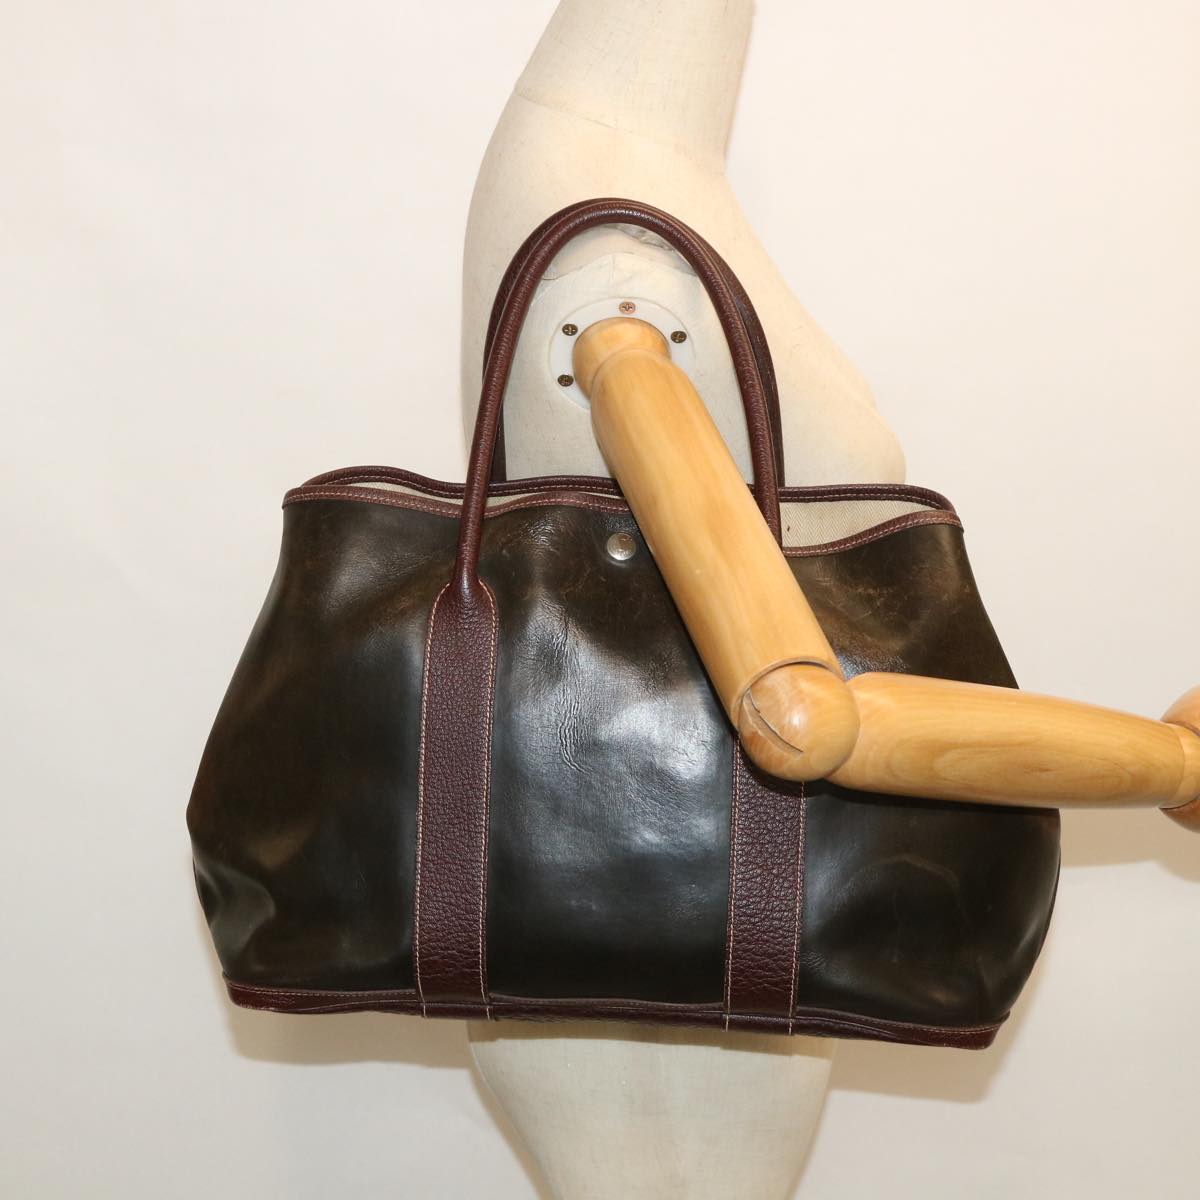 HERMES Garden Party PM Tote Bag Leather Brown Auth 54044